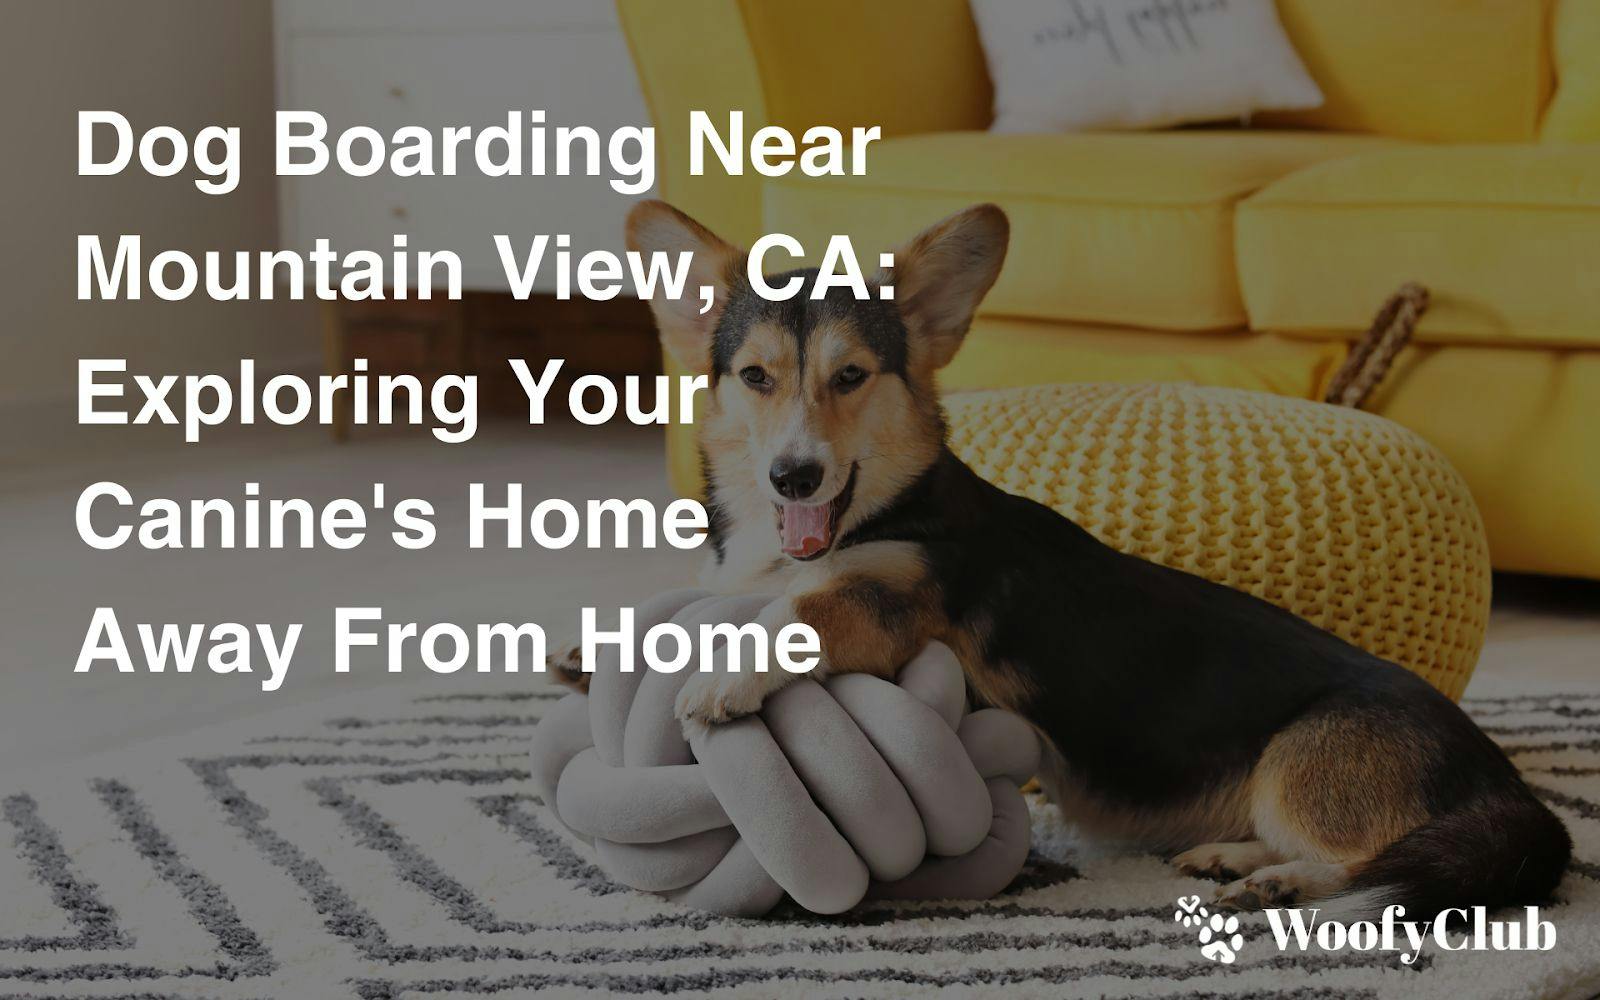 Dog Boarding Near Mountain View, CA: Exploring Your Canine's Home Away From Home